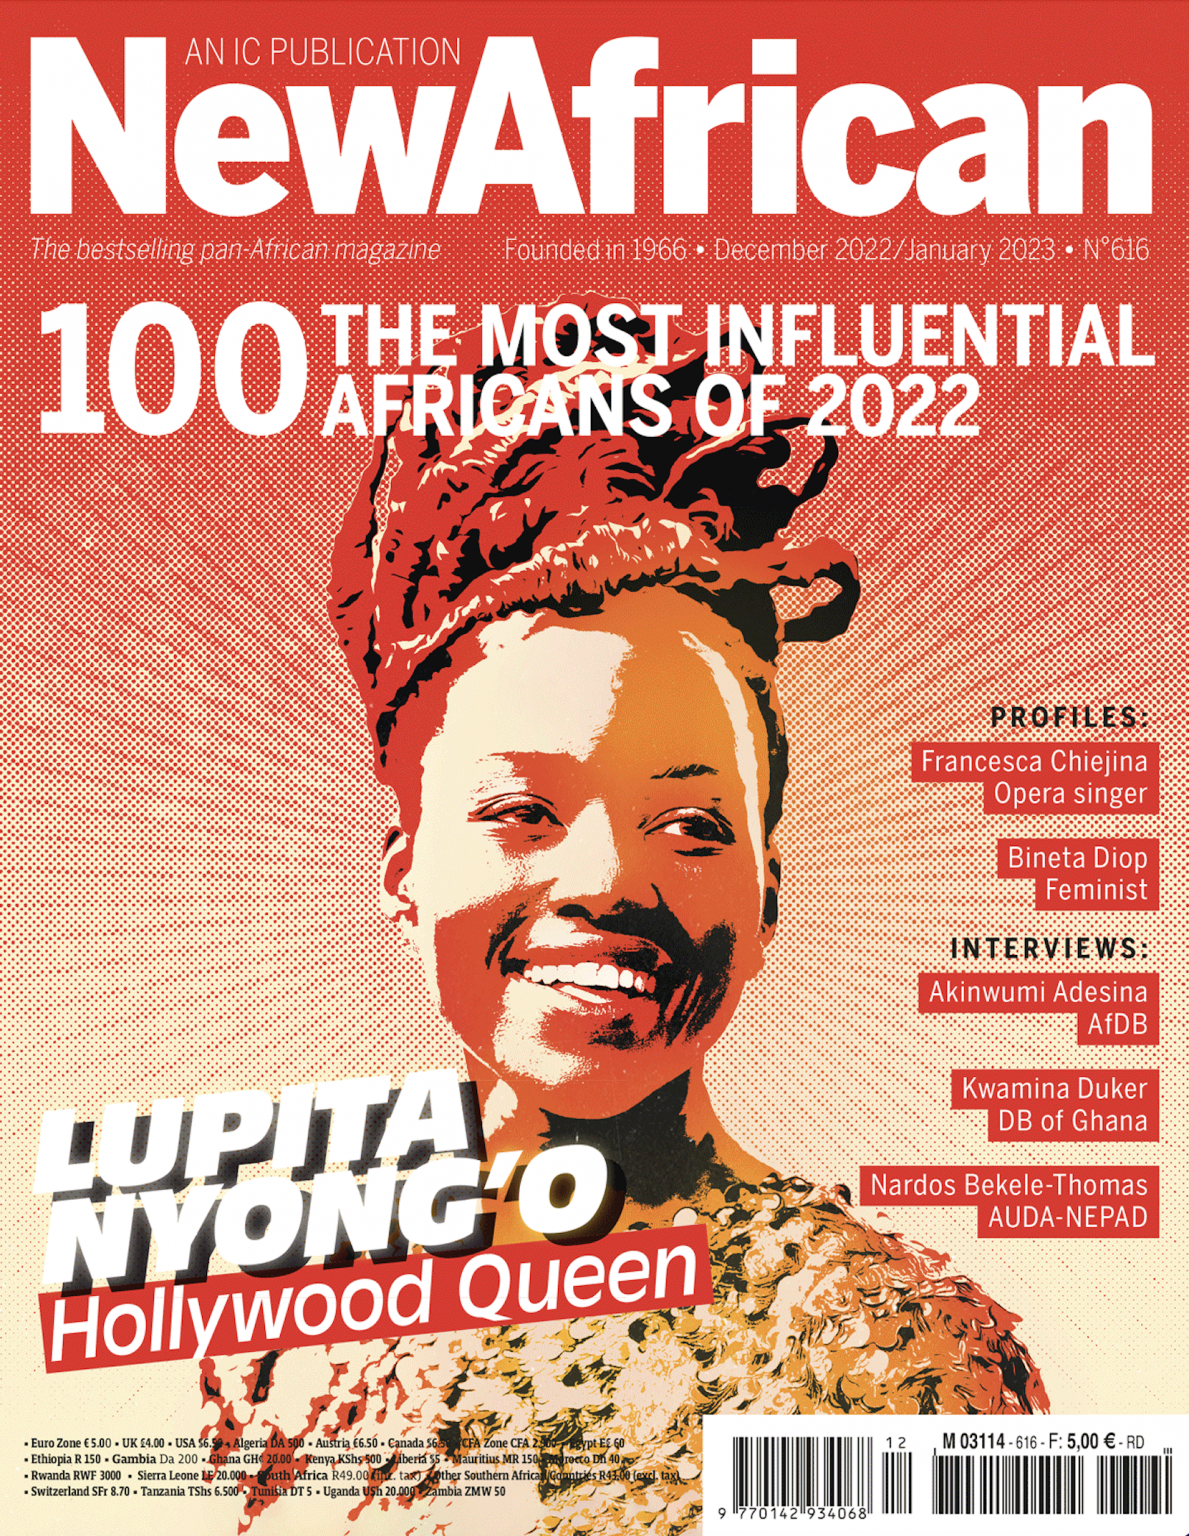 “New African” Magazine: Eight Moroccans listed among most influential Africans in 2022